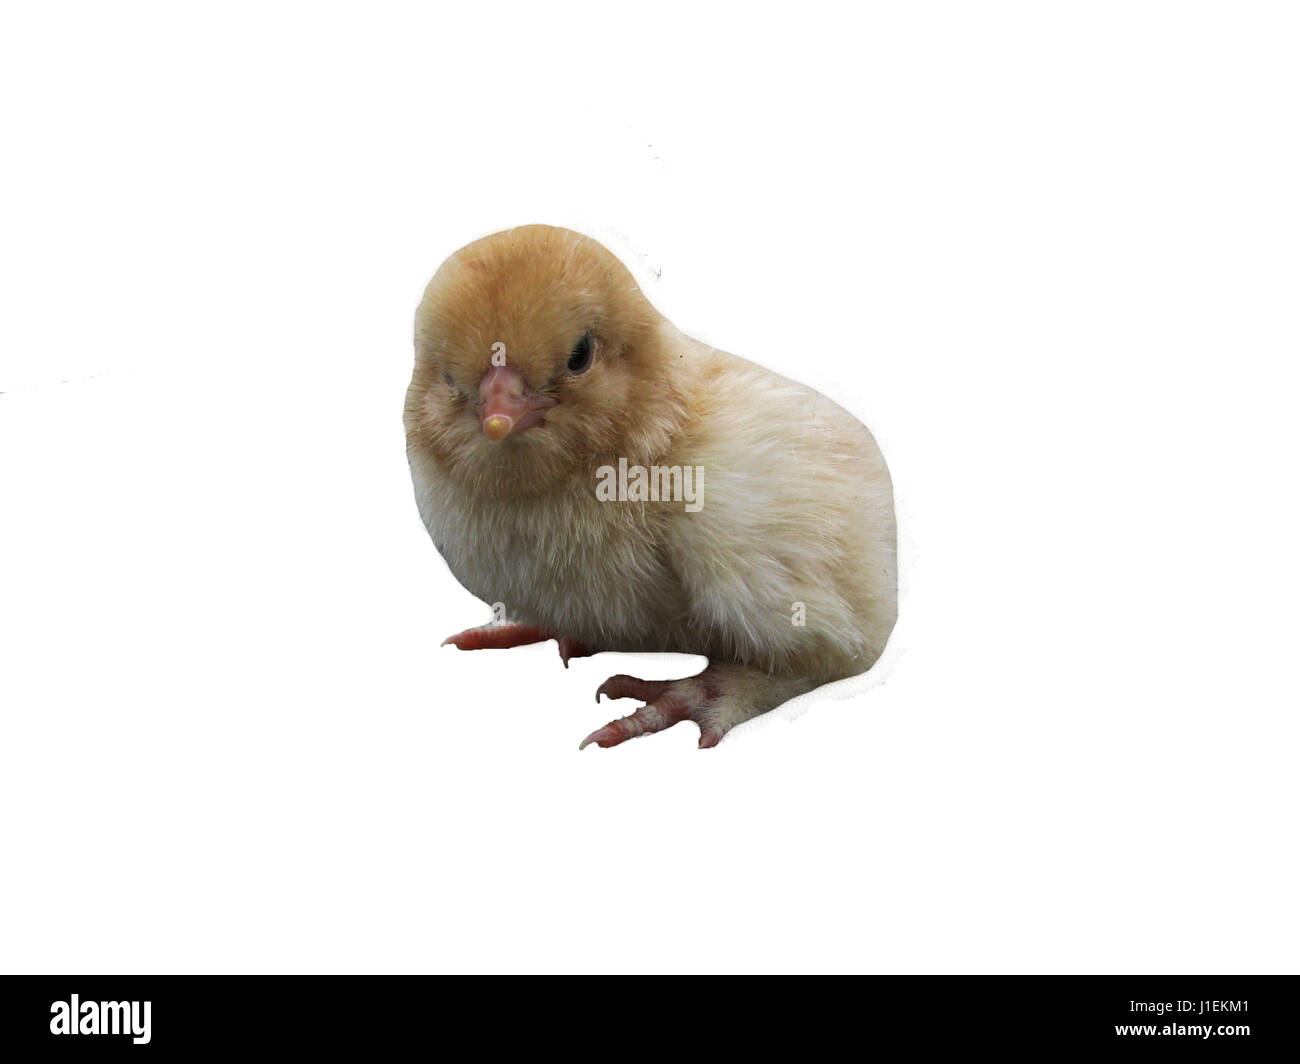 Cute little baby chicken isolated Stock Photo